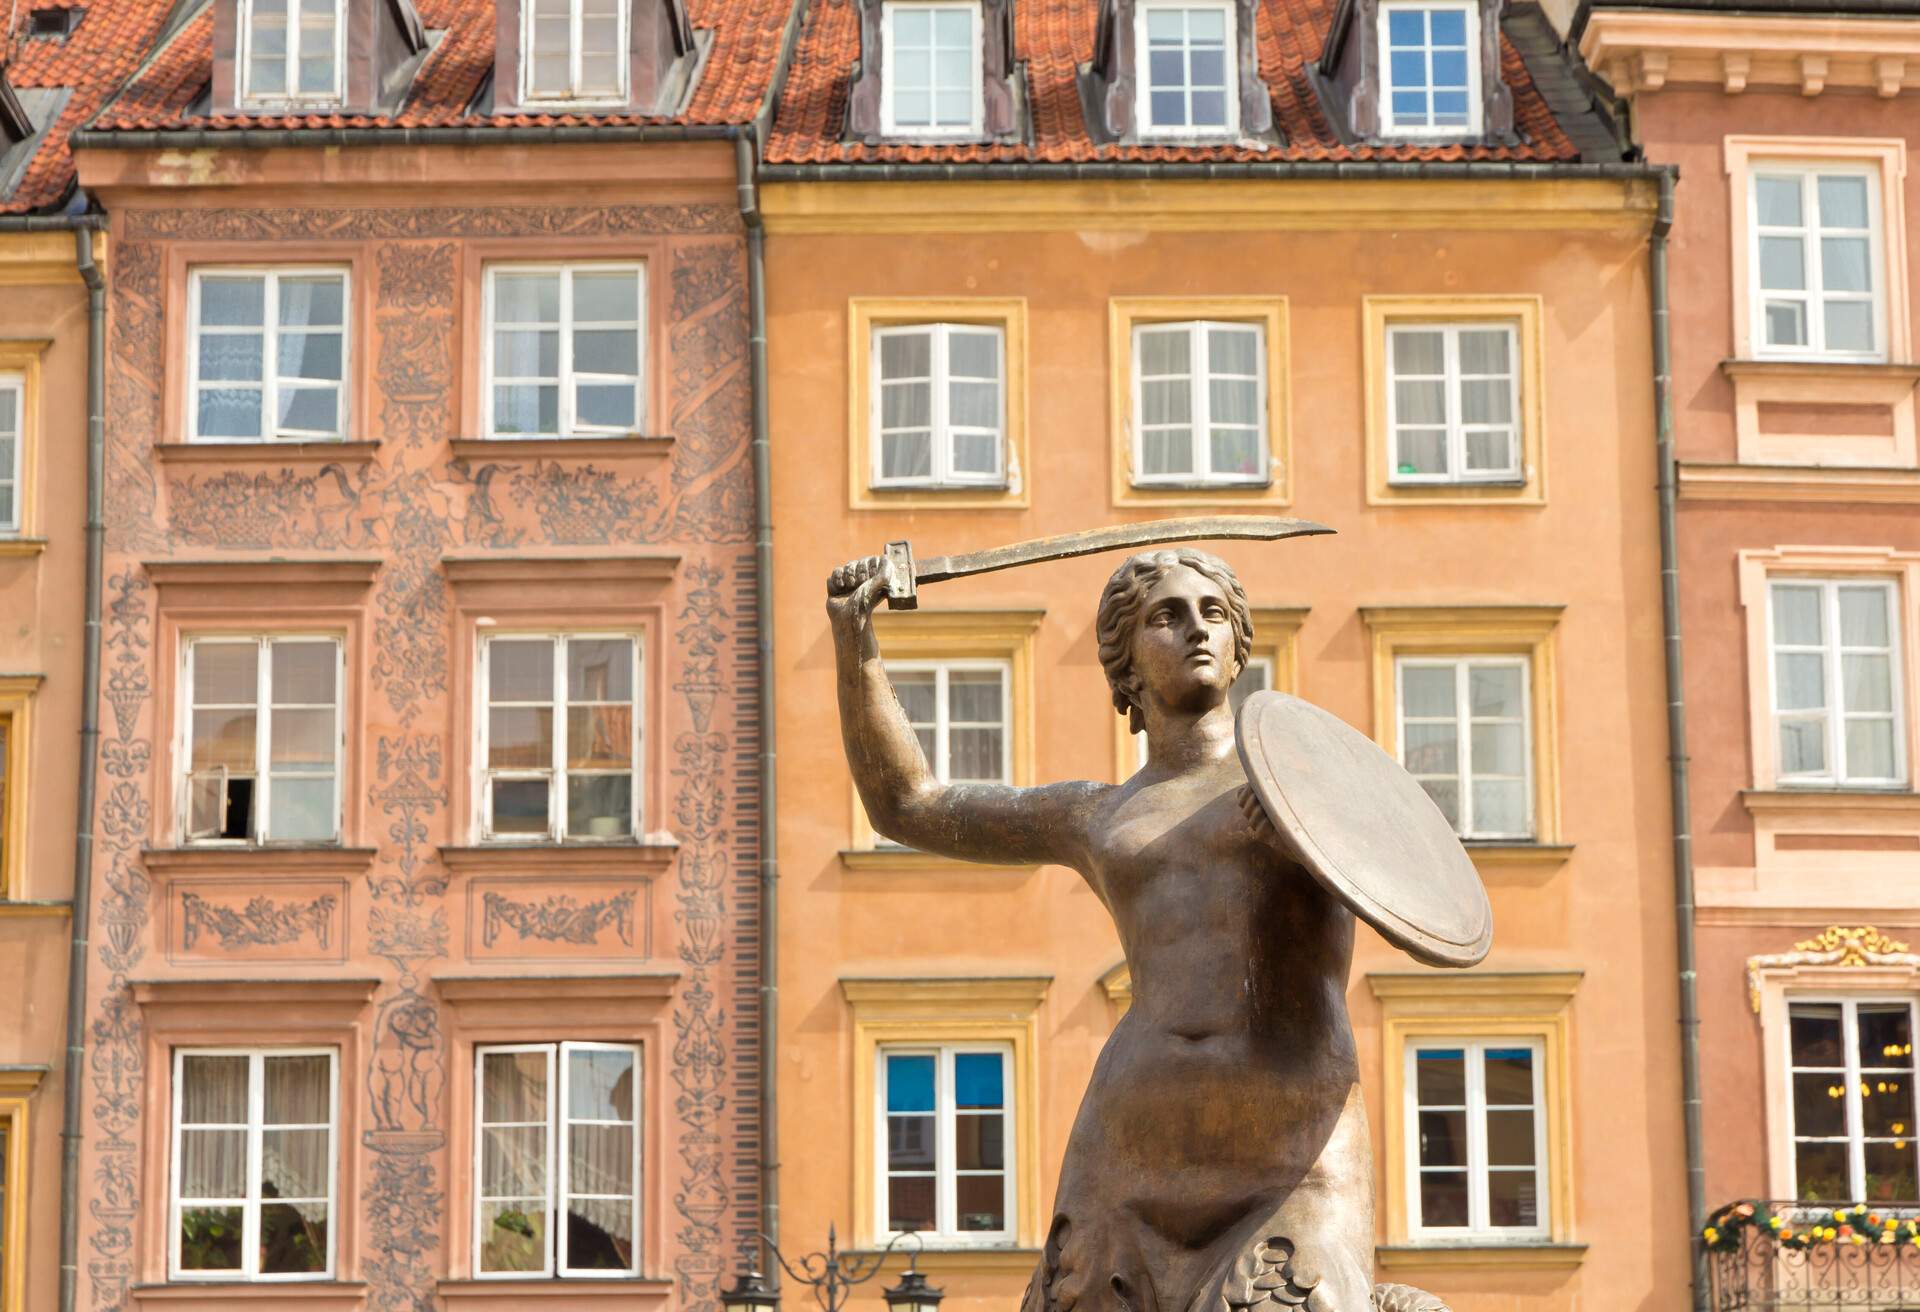 Warsaw Old Town Square and symbol of Warsaw - Mermaid. Sculptor Konstanty Hegel. Sculpture has been done in 1855 year. It stand in Public place - Warsaw Old Town Square.